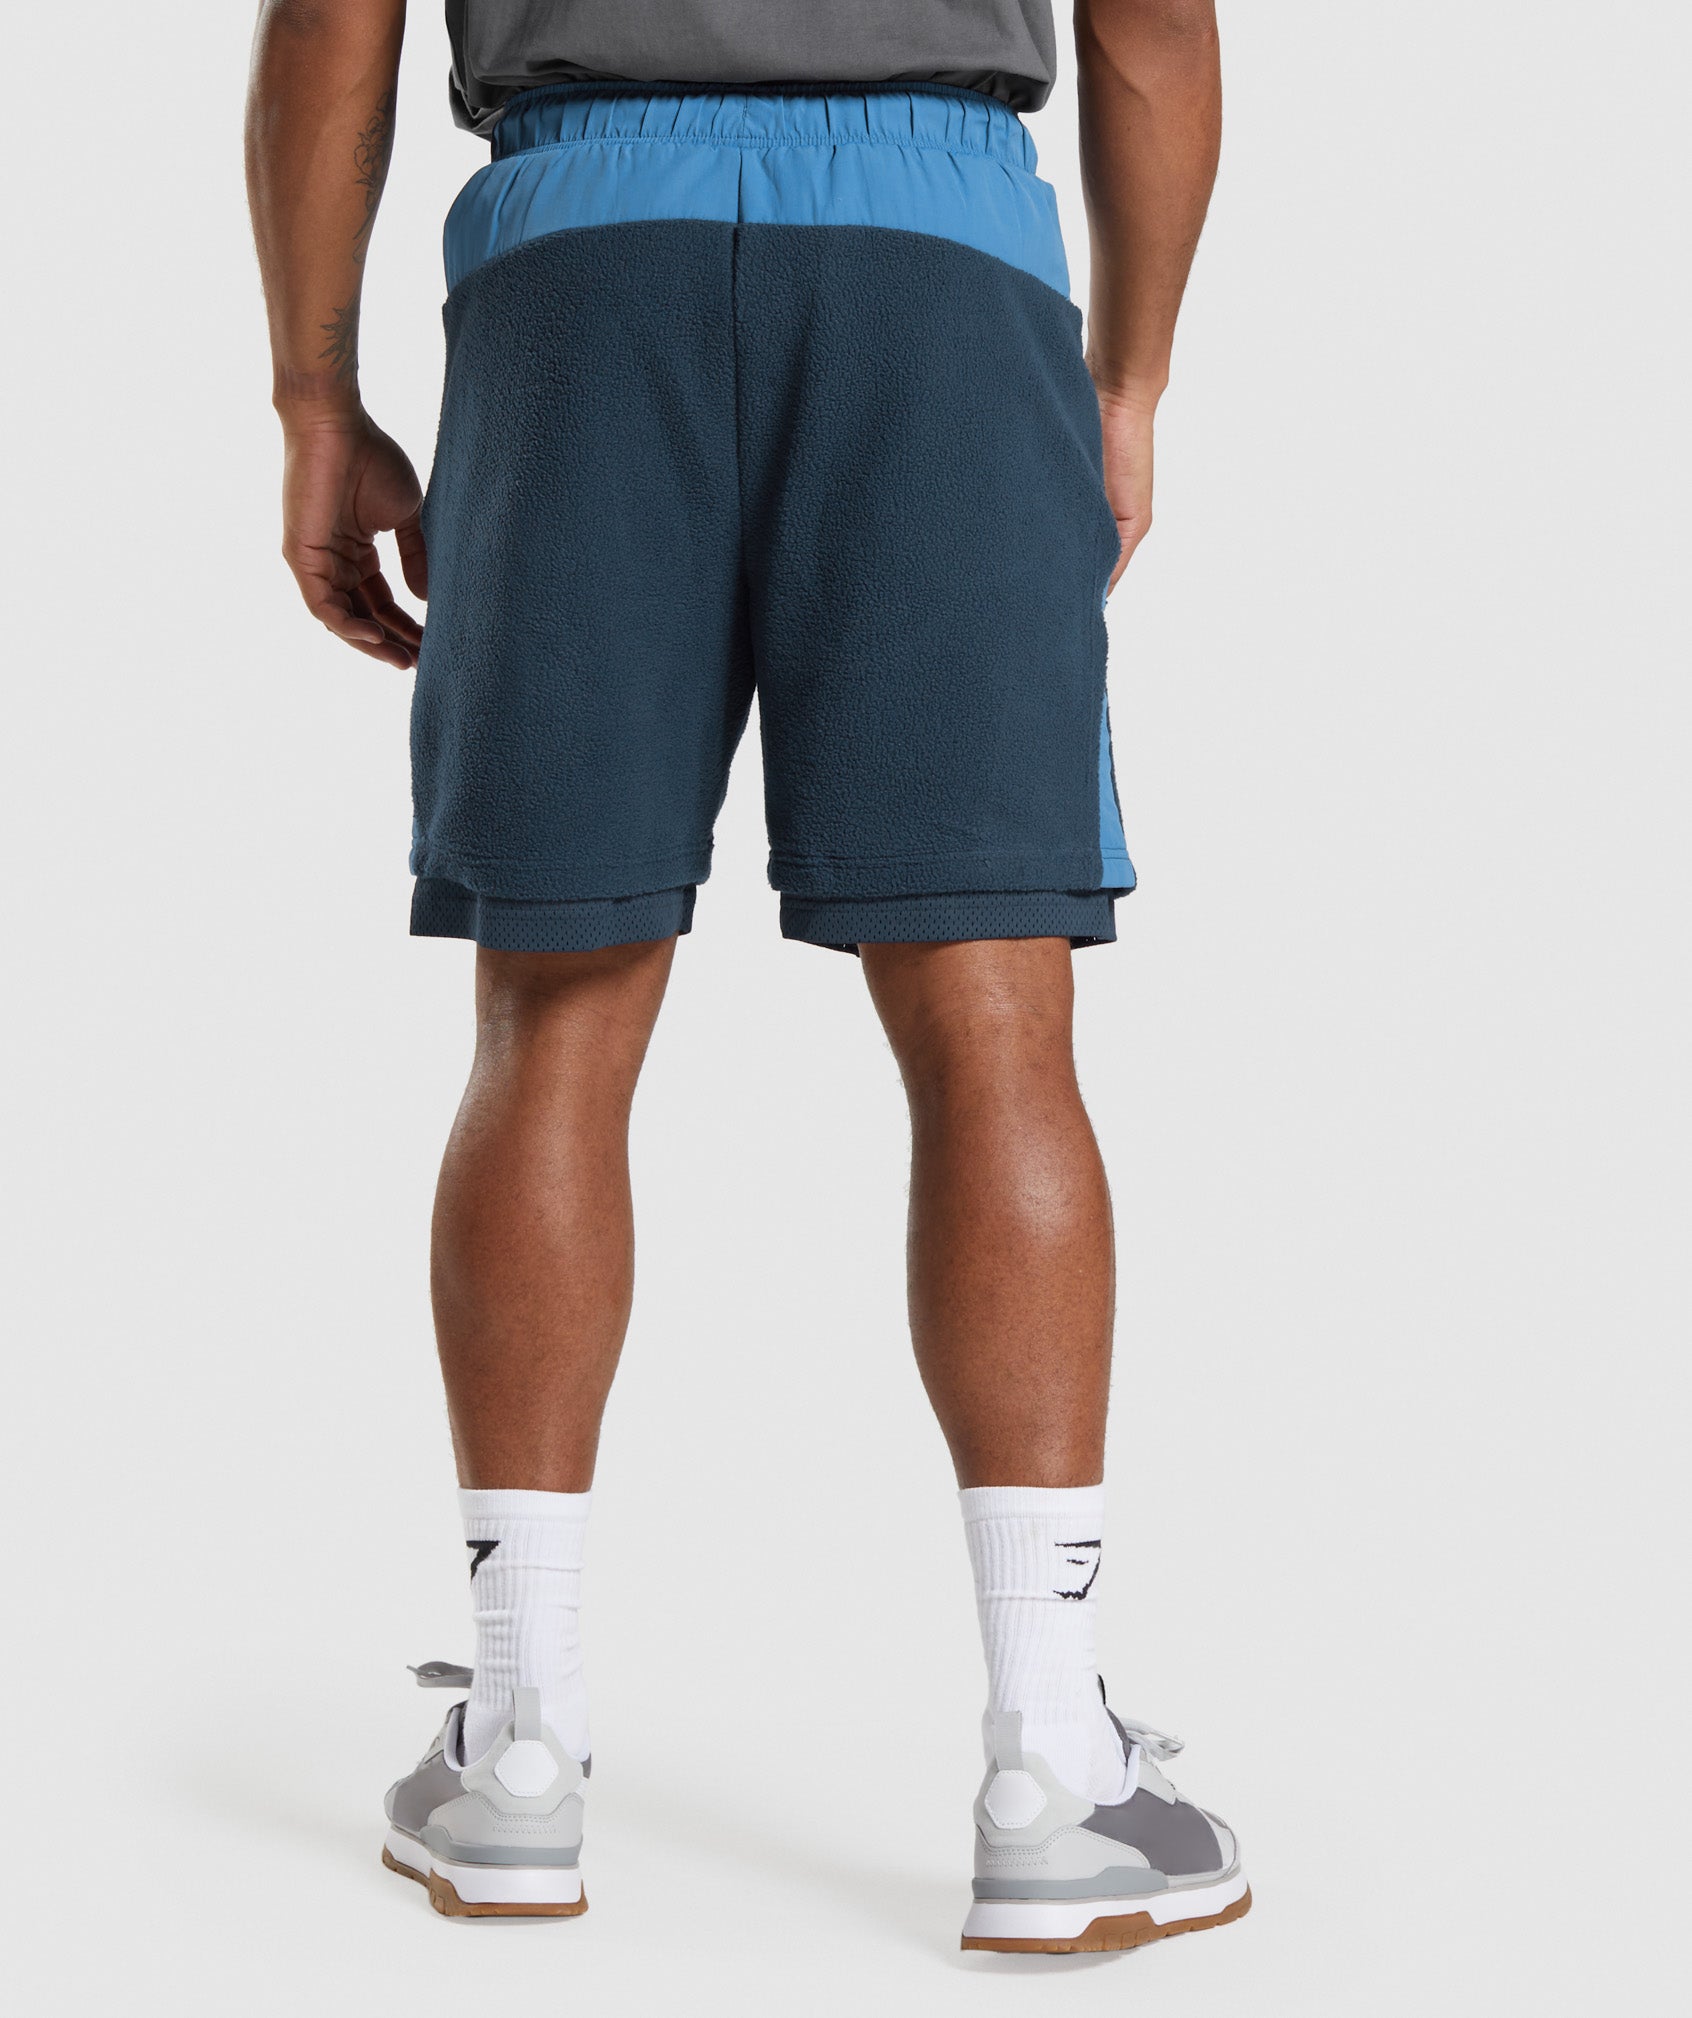 Vibes Shorts in Navy/Lakeside Blue - view 2